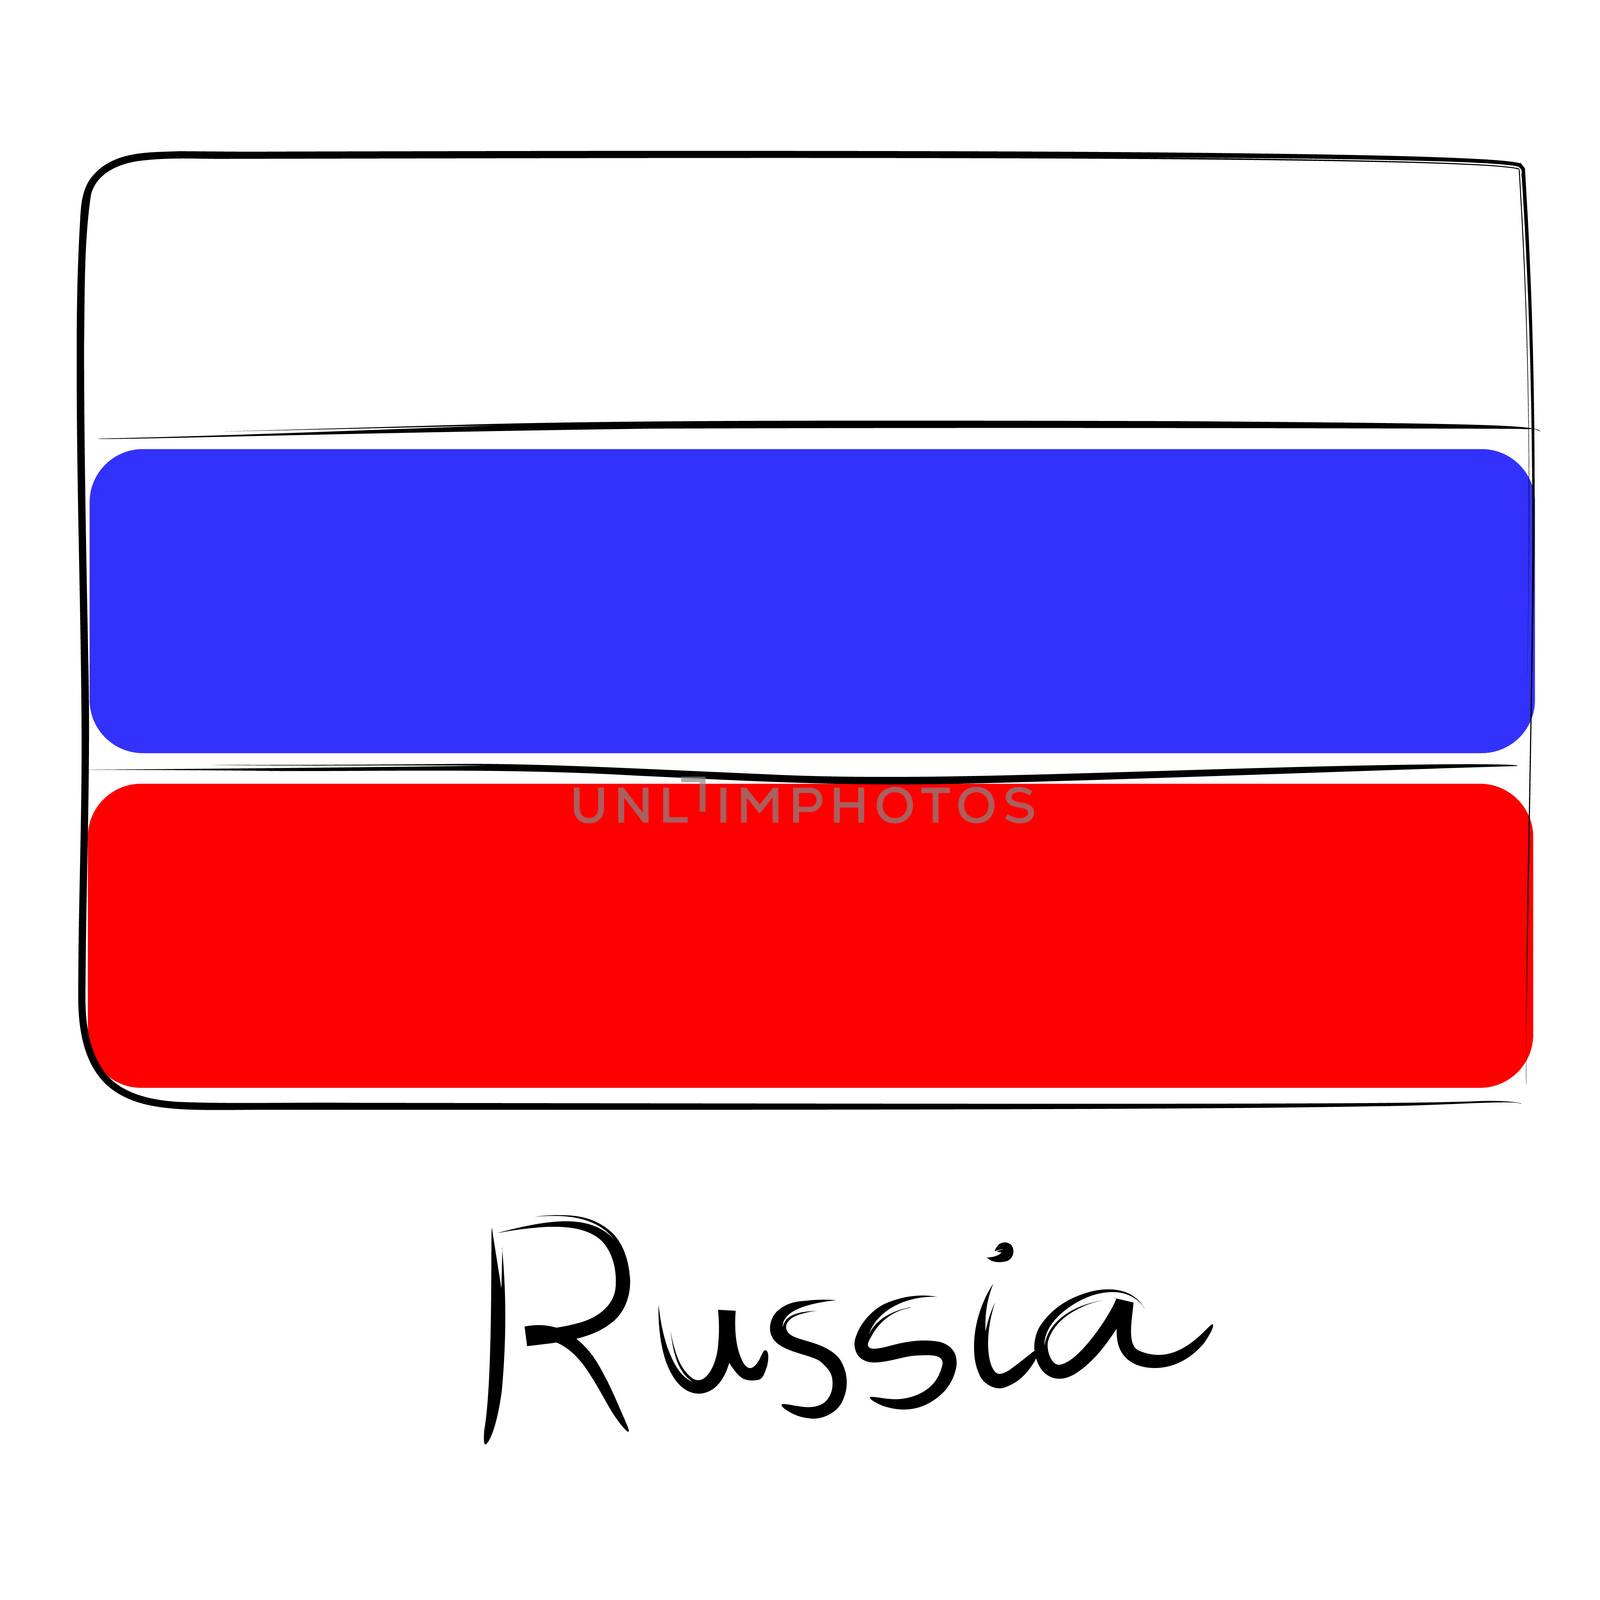 Russia country flag doodle with text isolated on white